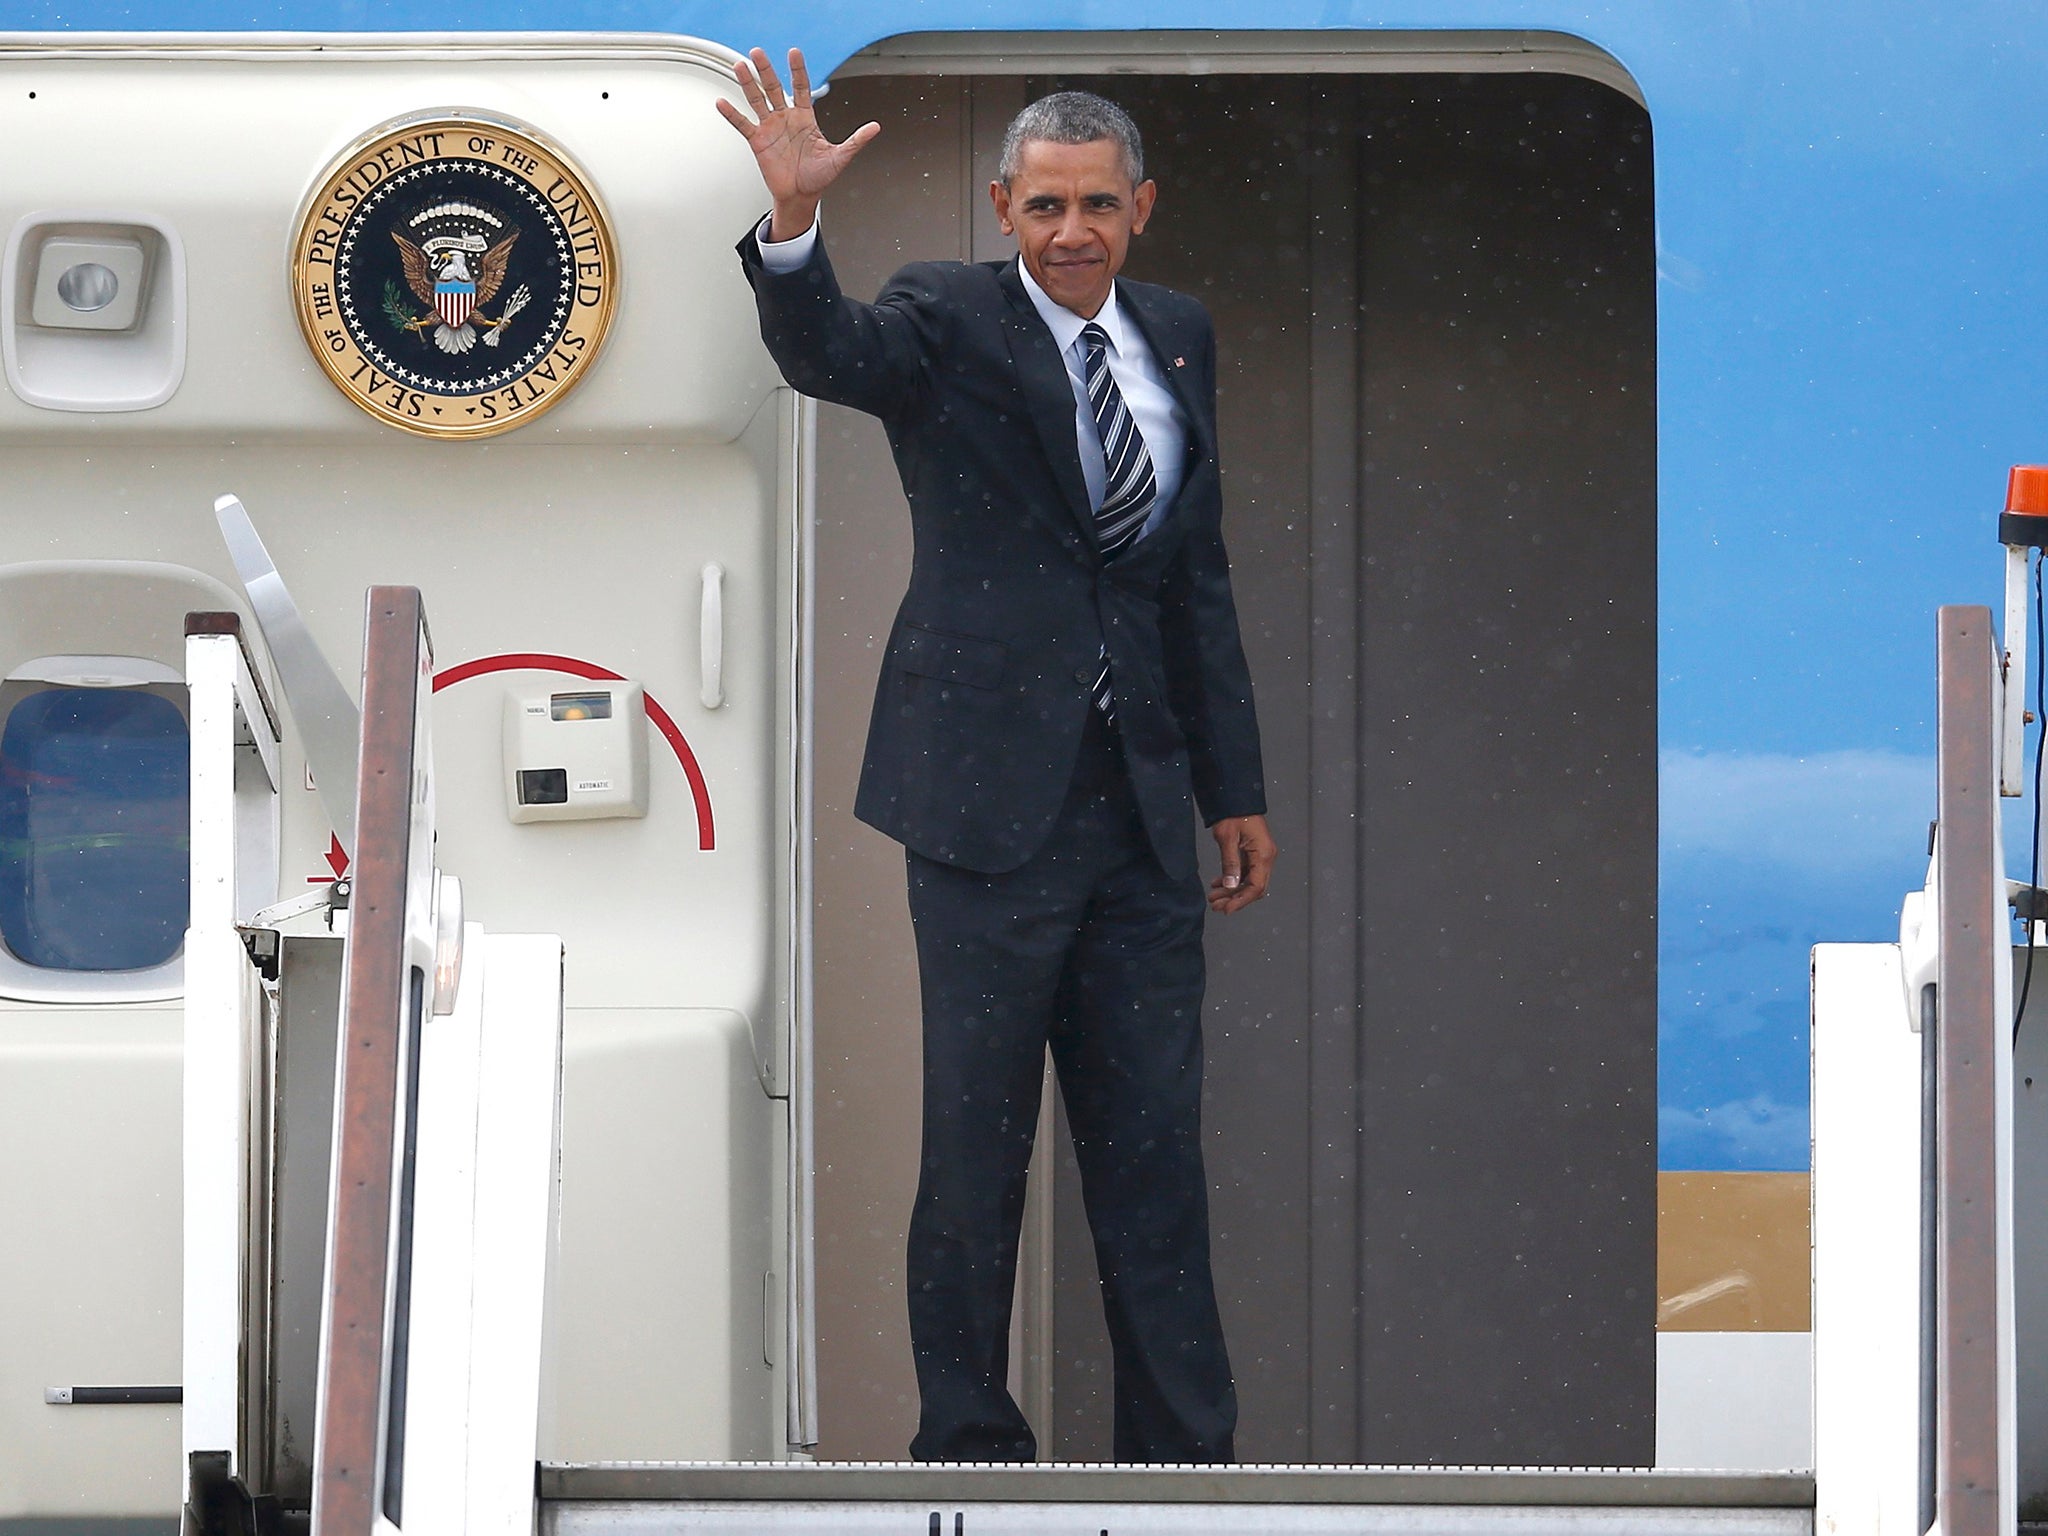 Obama left controversy in his wake as he departed from Stansted airport